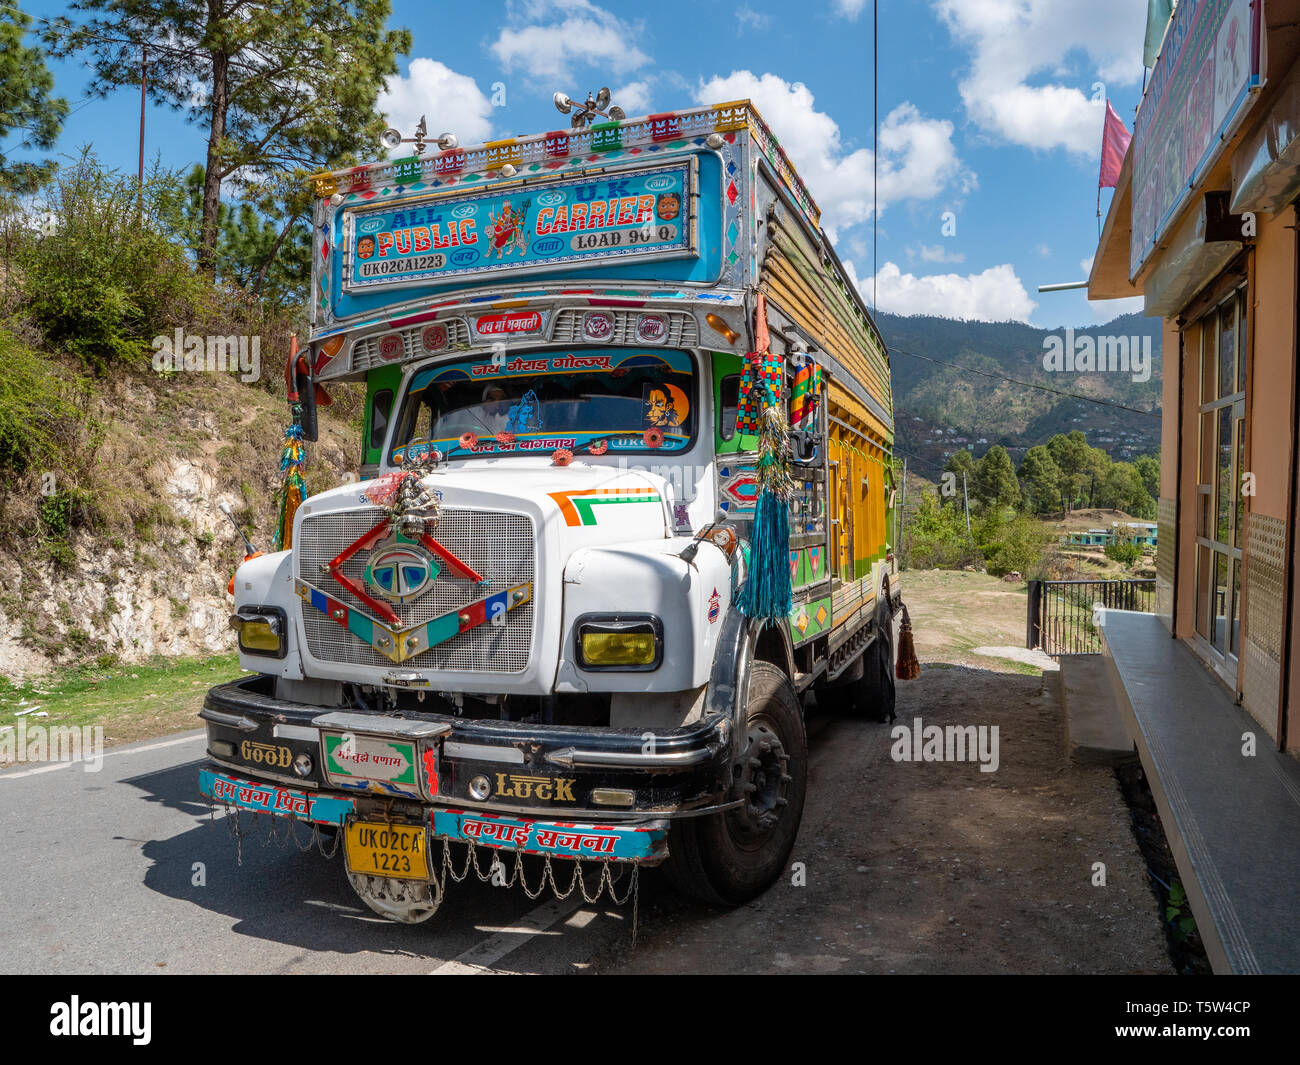 Colourfully painted and elaborately decorated heavy goods lorry on a road through the Binsar region of Uttarakhand Northern India Stock Photo